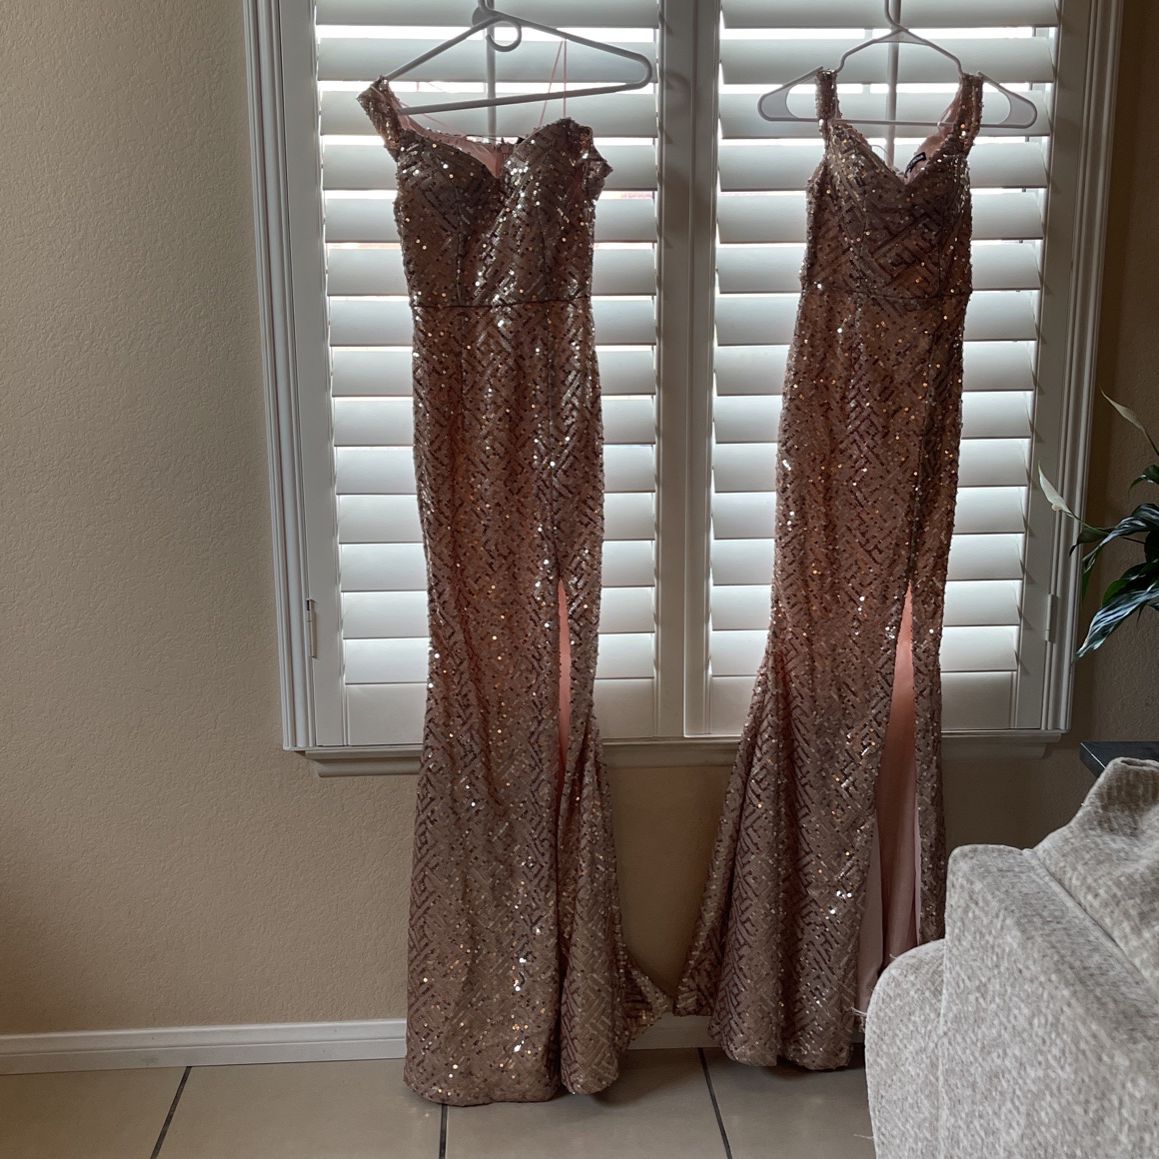 2 New Party Dresses Never Worn 